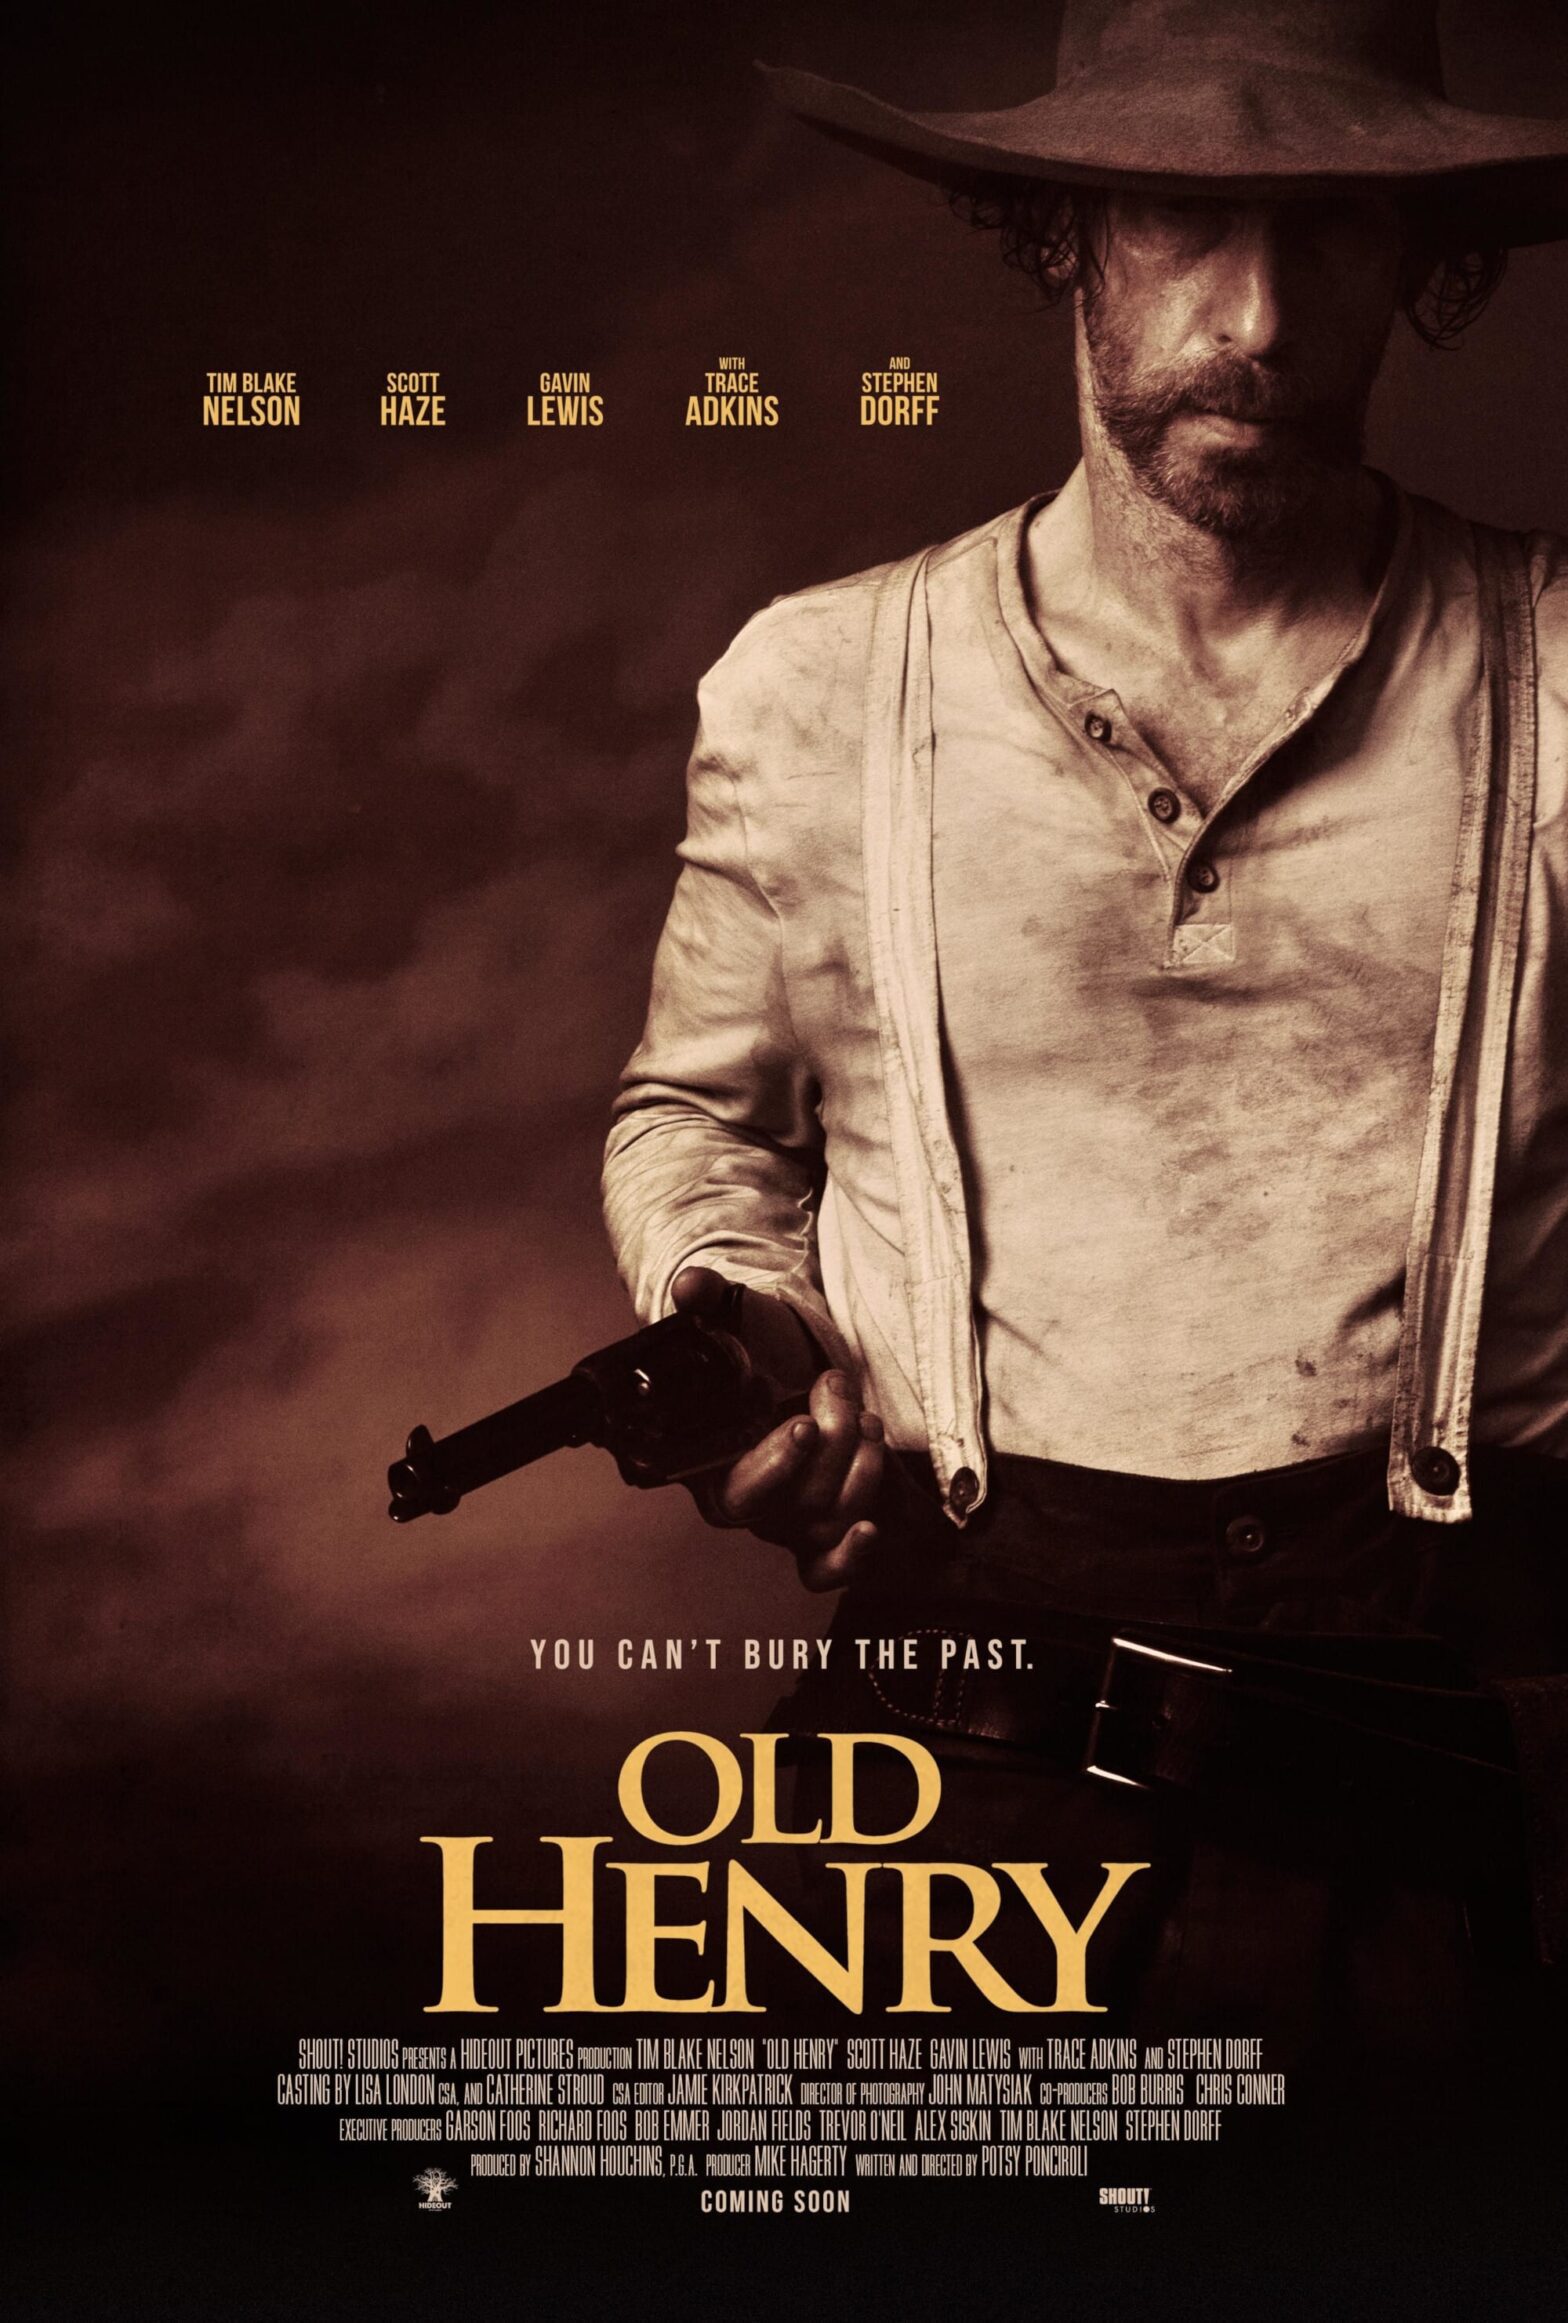 Poster for the movie "Old Henry"